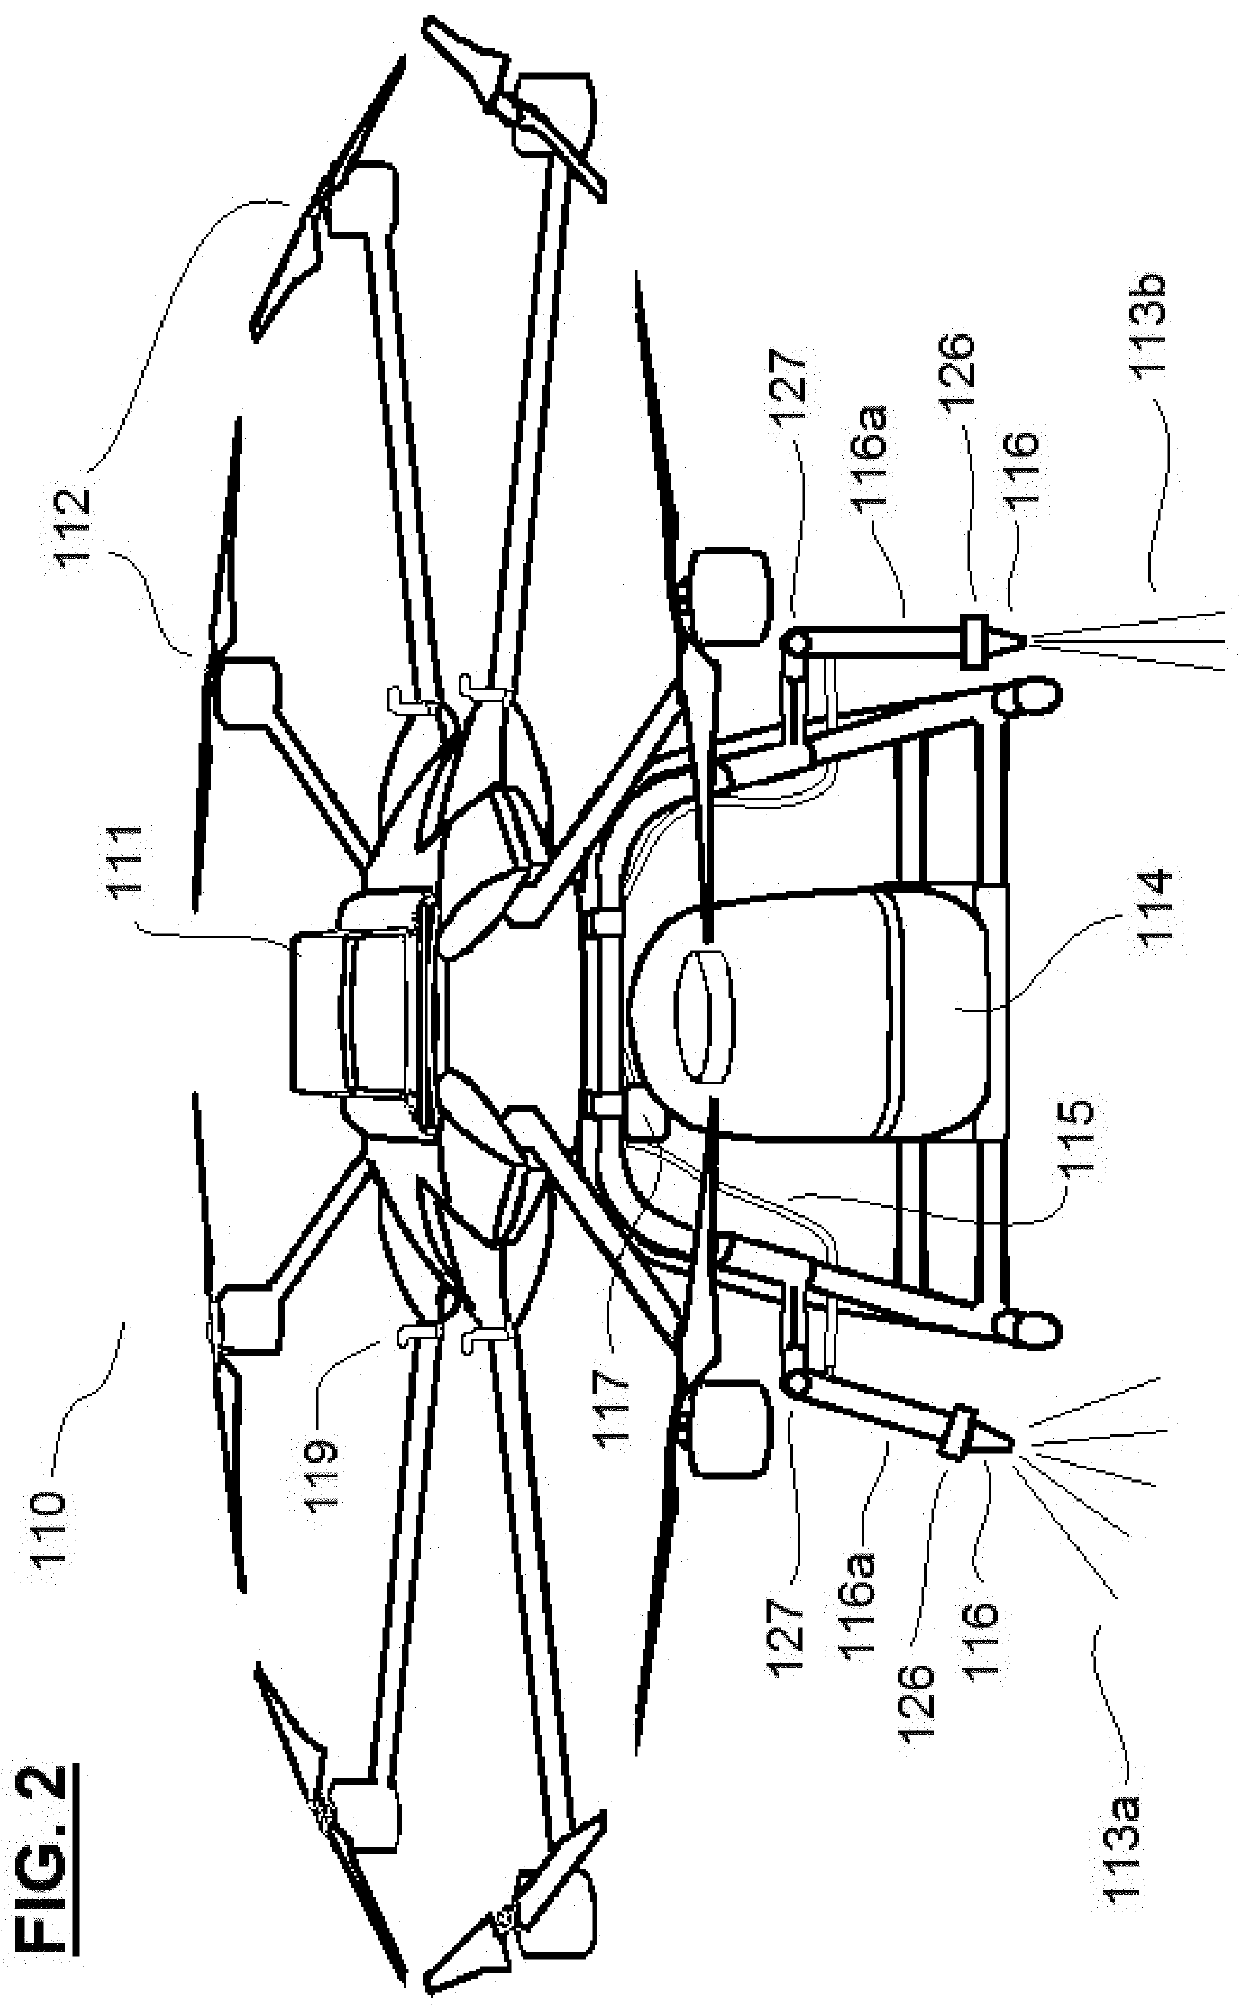 Drone systems for cleaning solar panels and methods of using the same